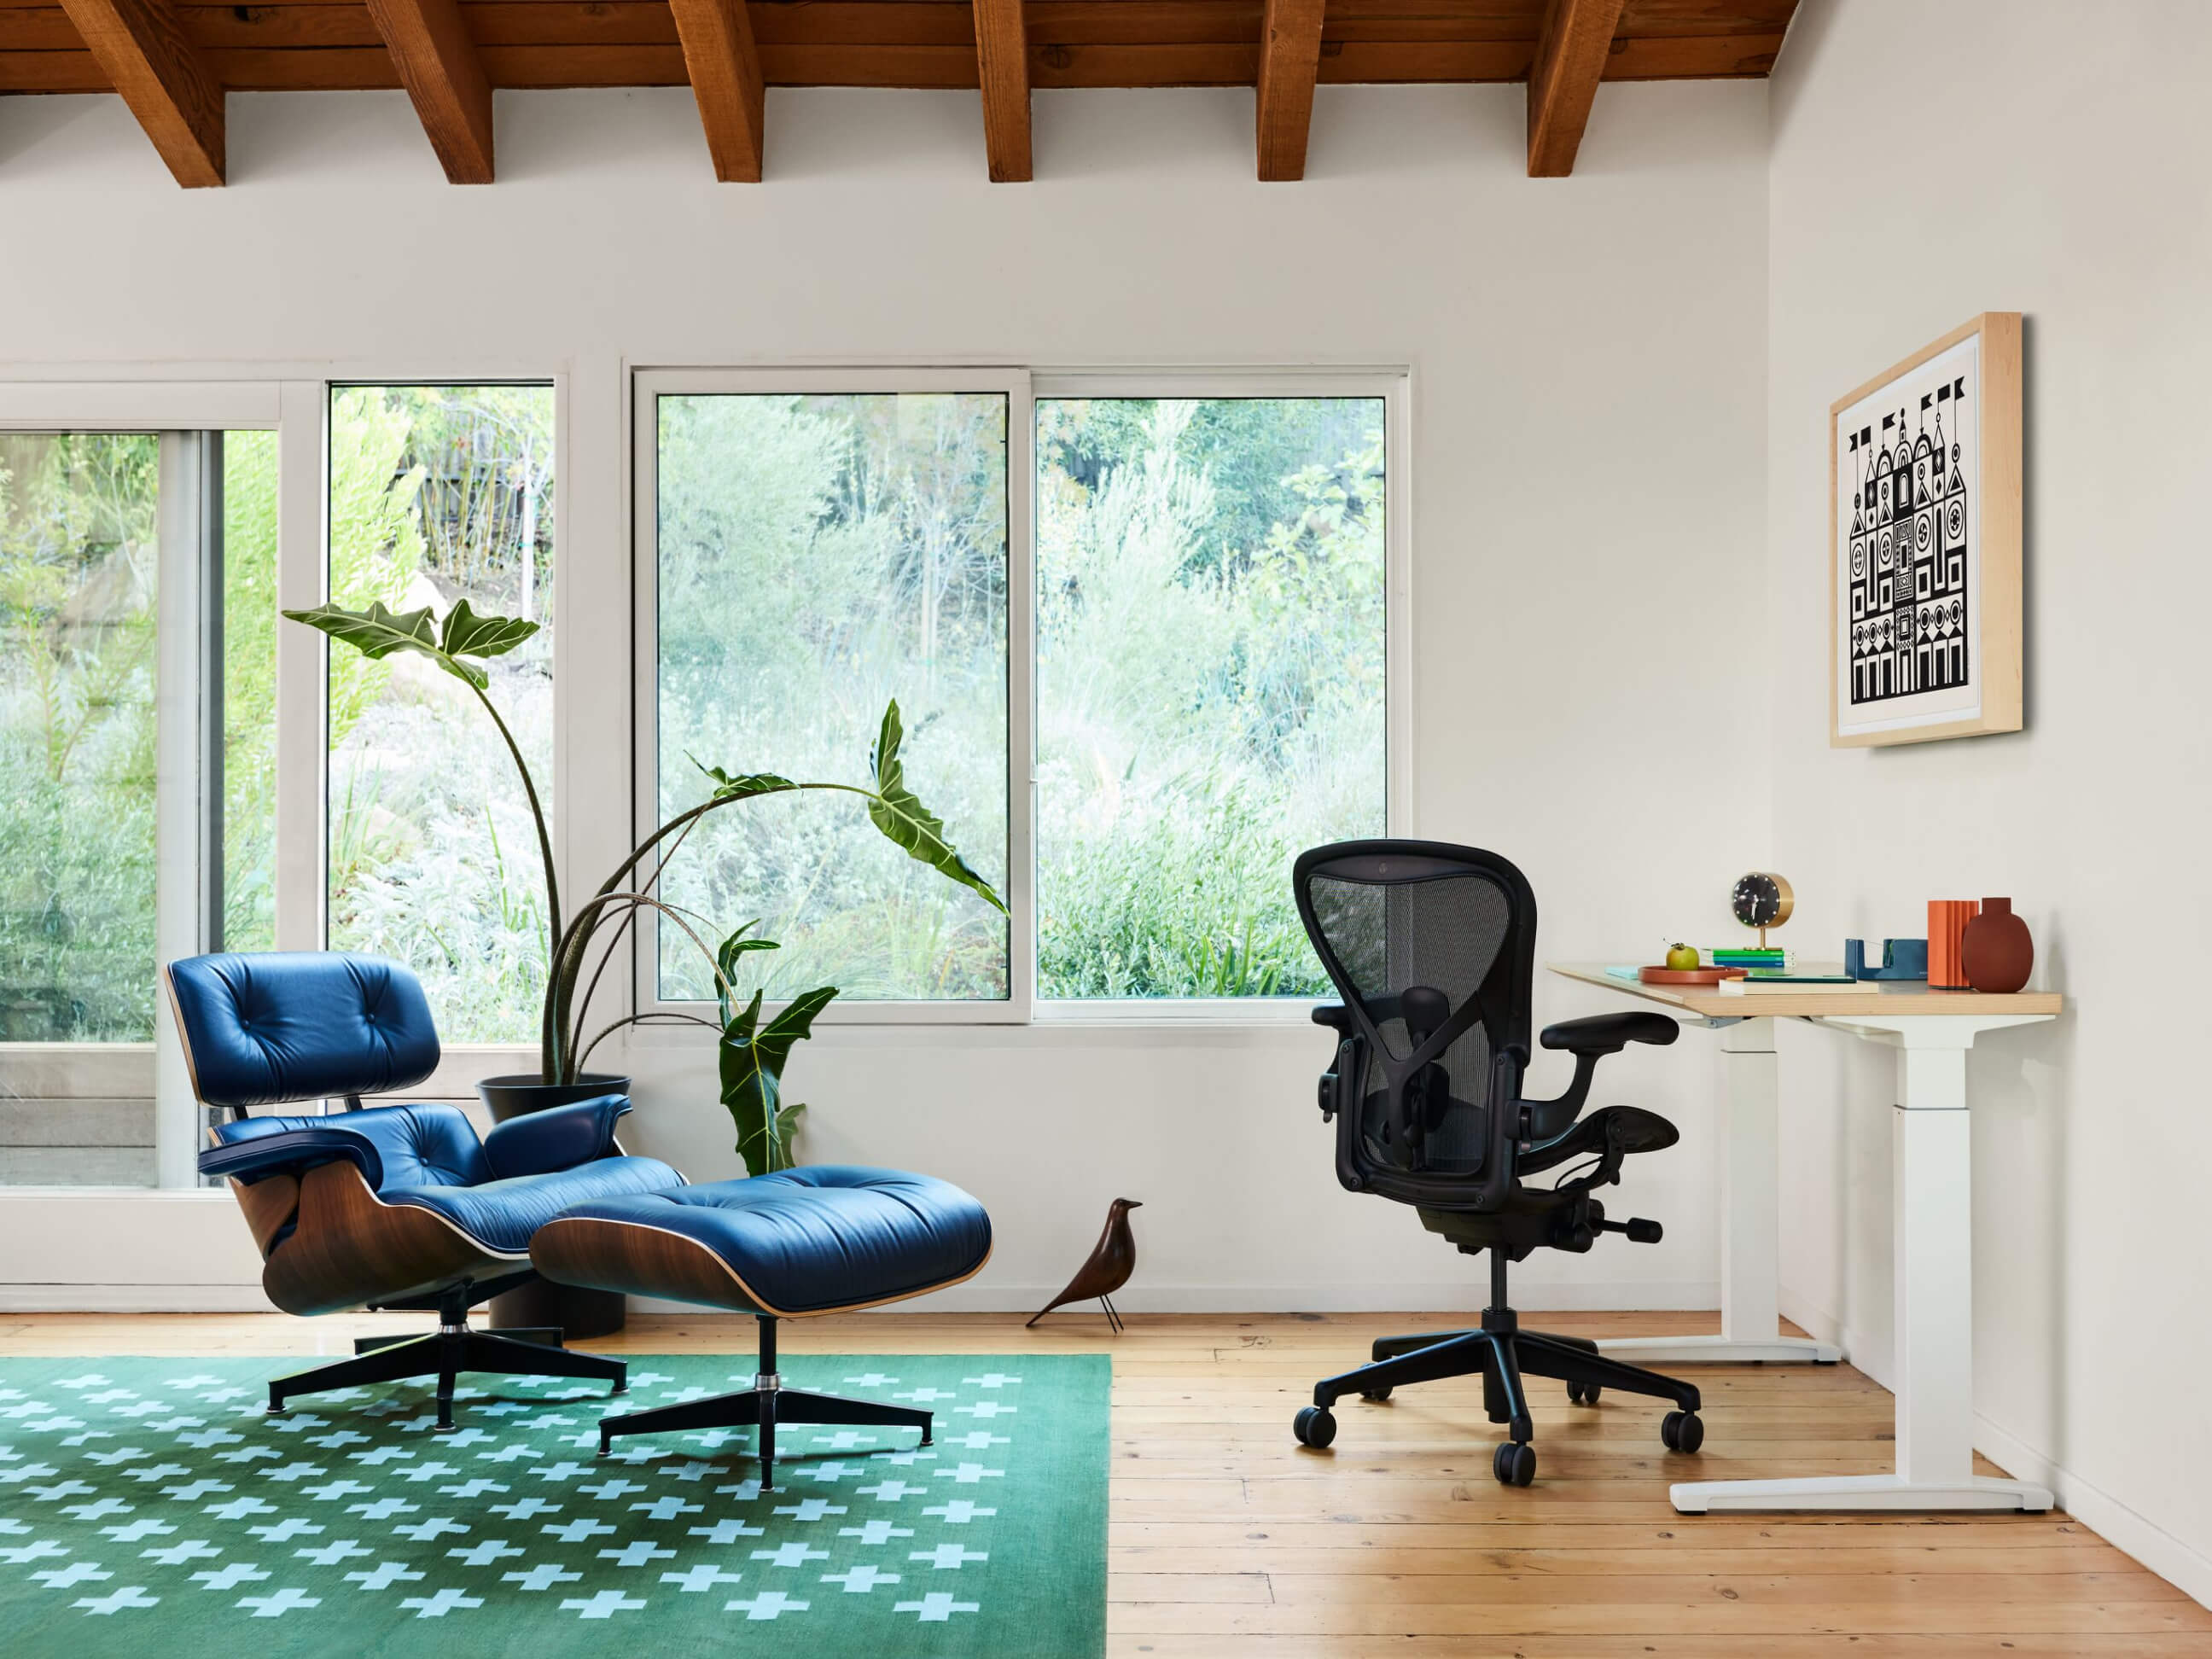 Herman Miller - Modern Furniture for the Office and Home